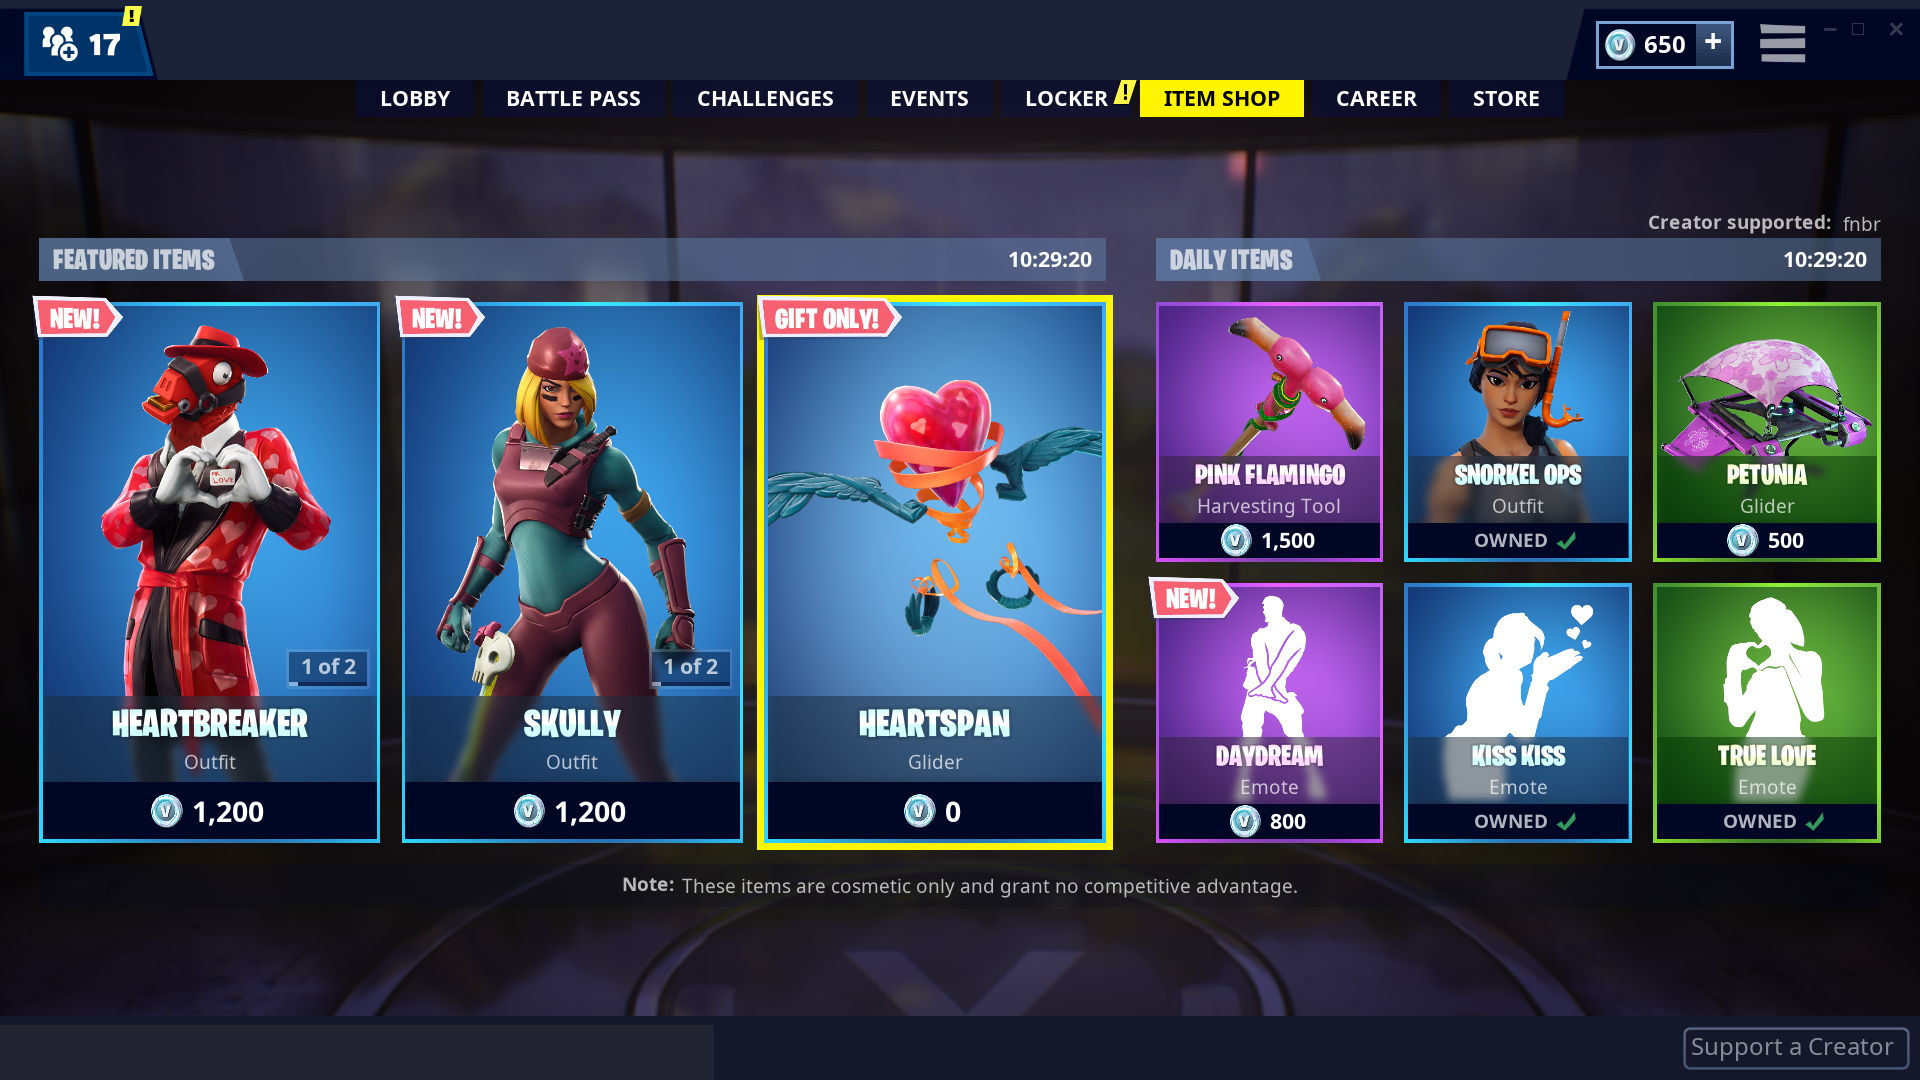 head to the item shop tab and select the heartspan panel - buy friend code fortnite